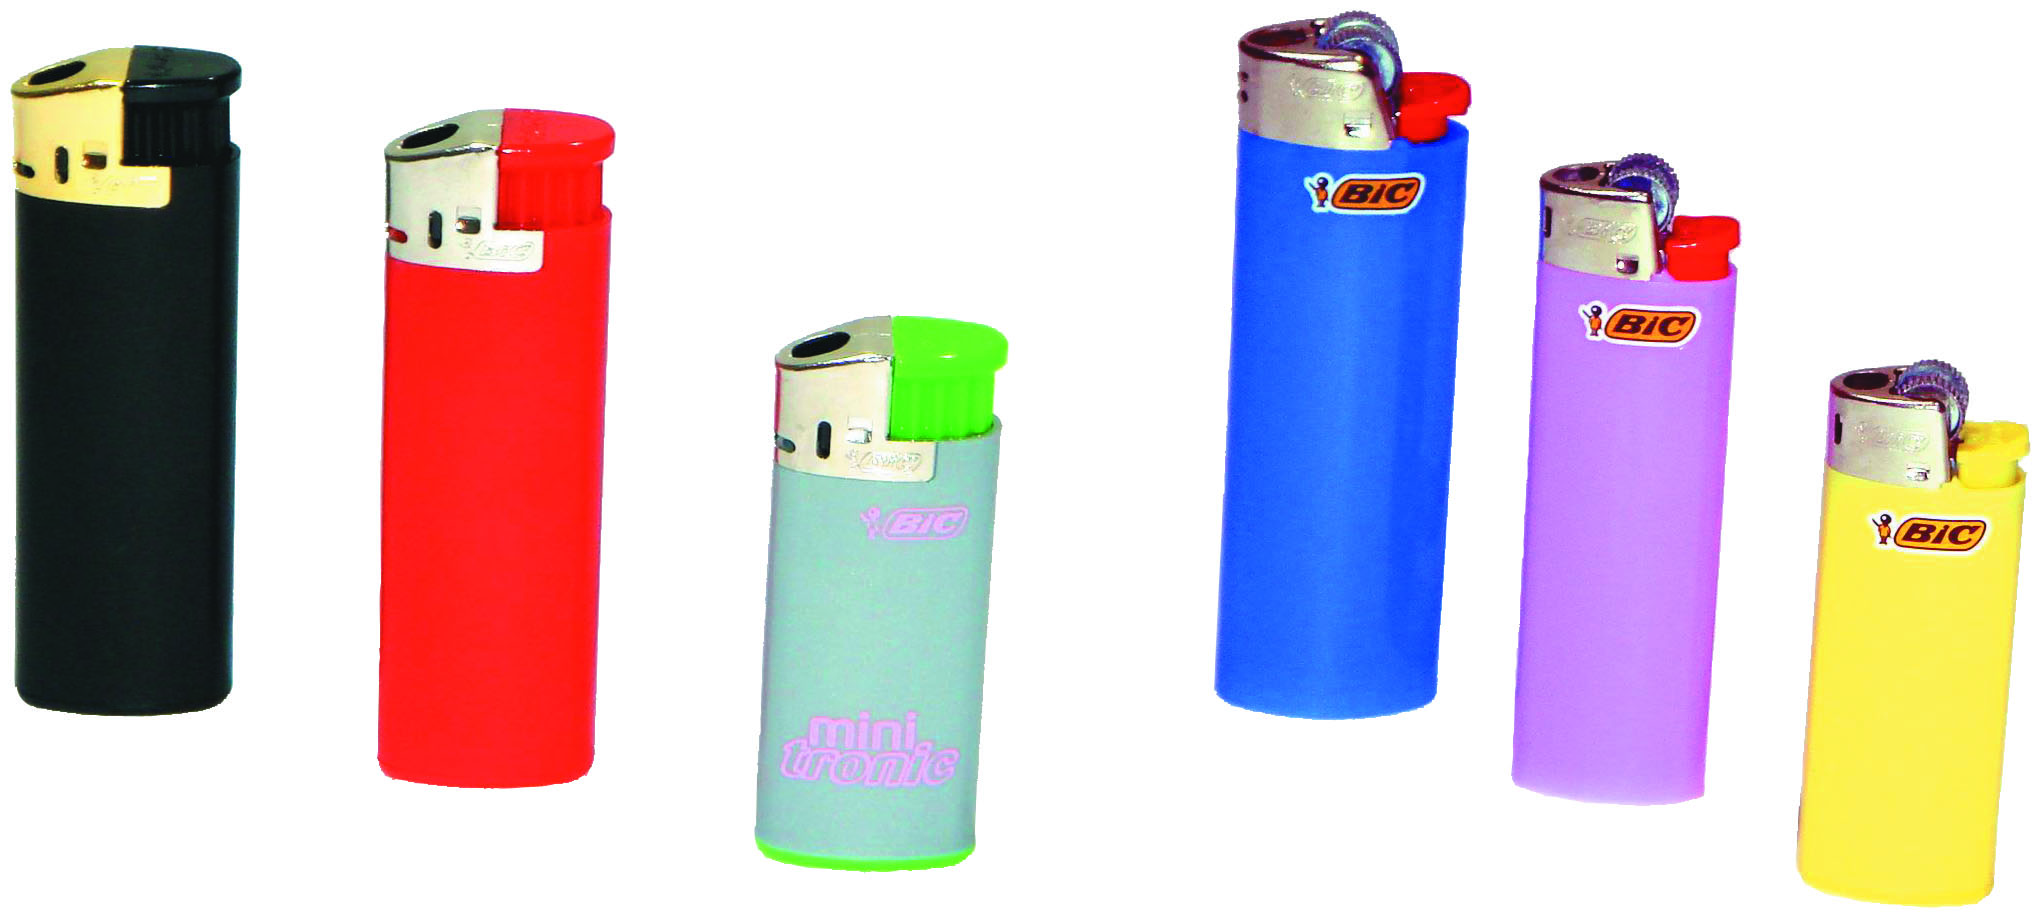 +Bic  lighter, large w/ picture